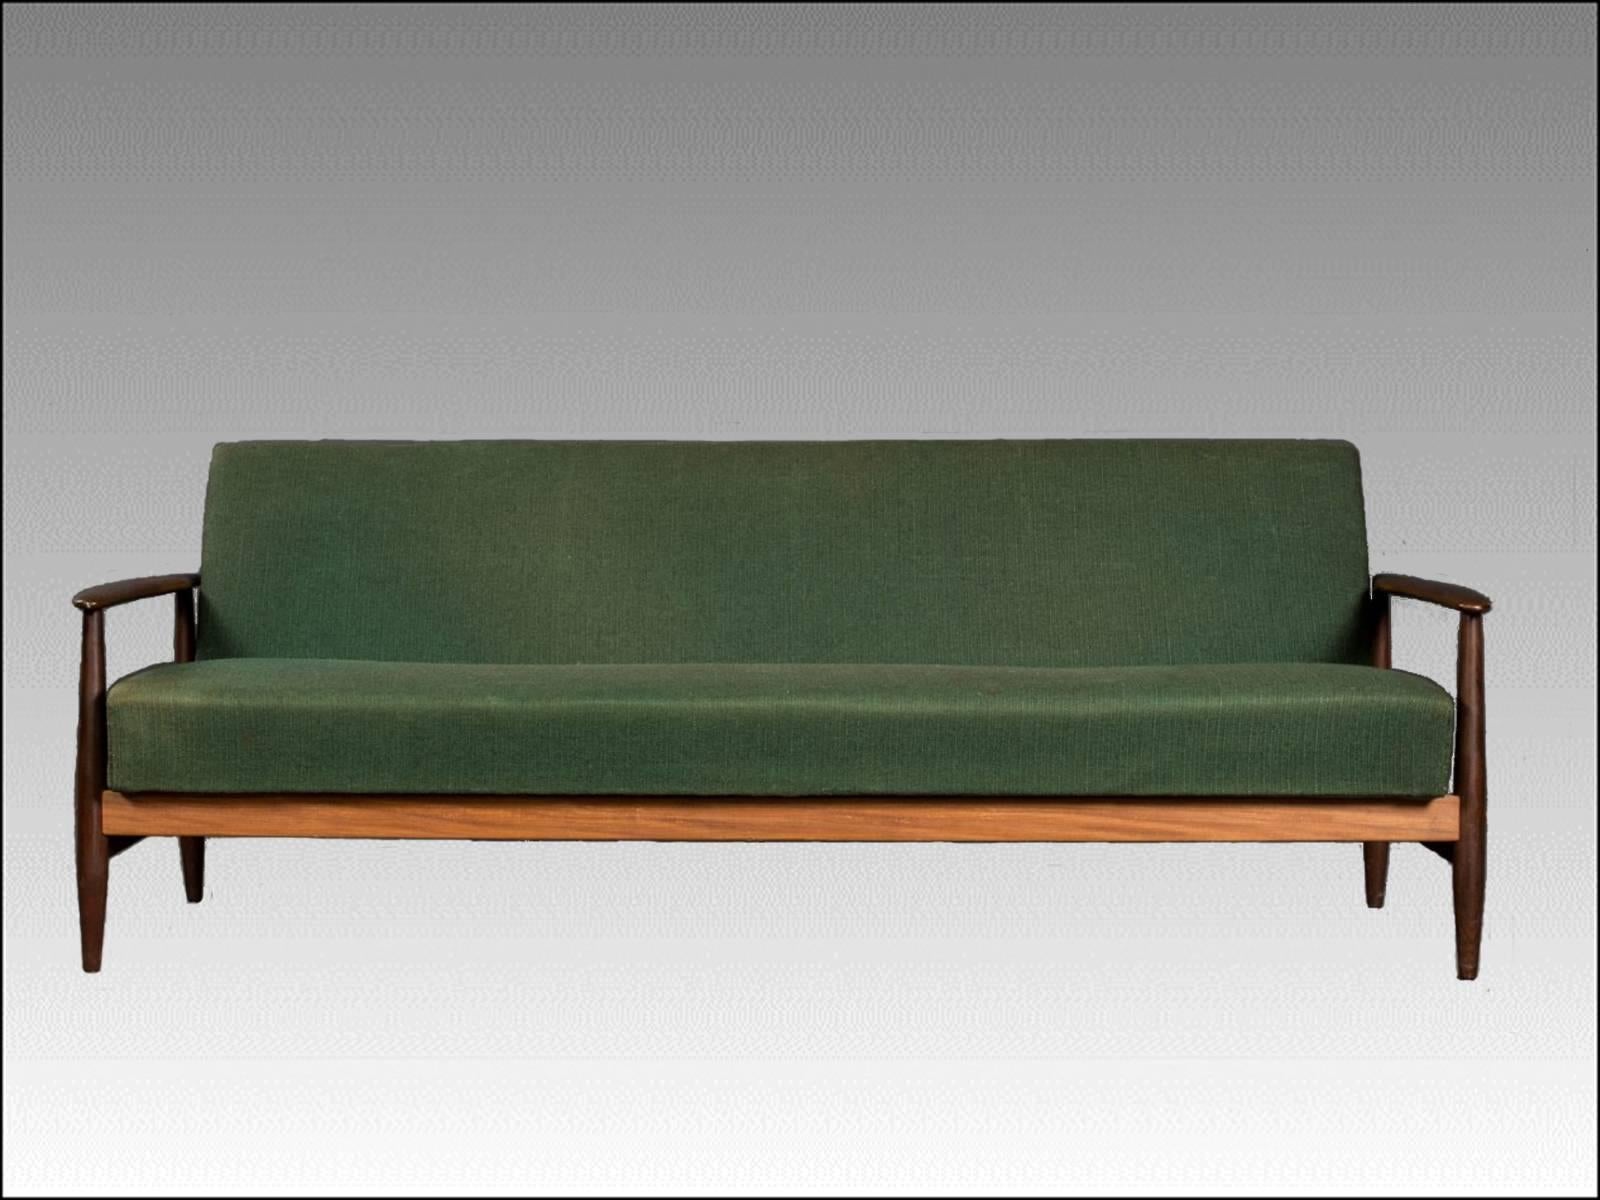 Danish 1960s Grete Jalk Style Sofabed and Armchair in Teak and Green Fabric